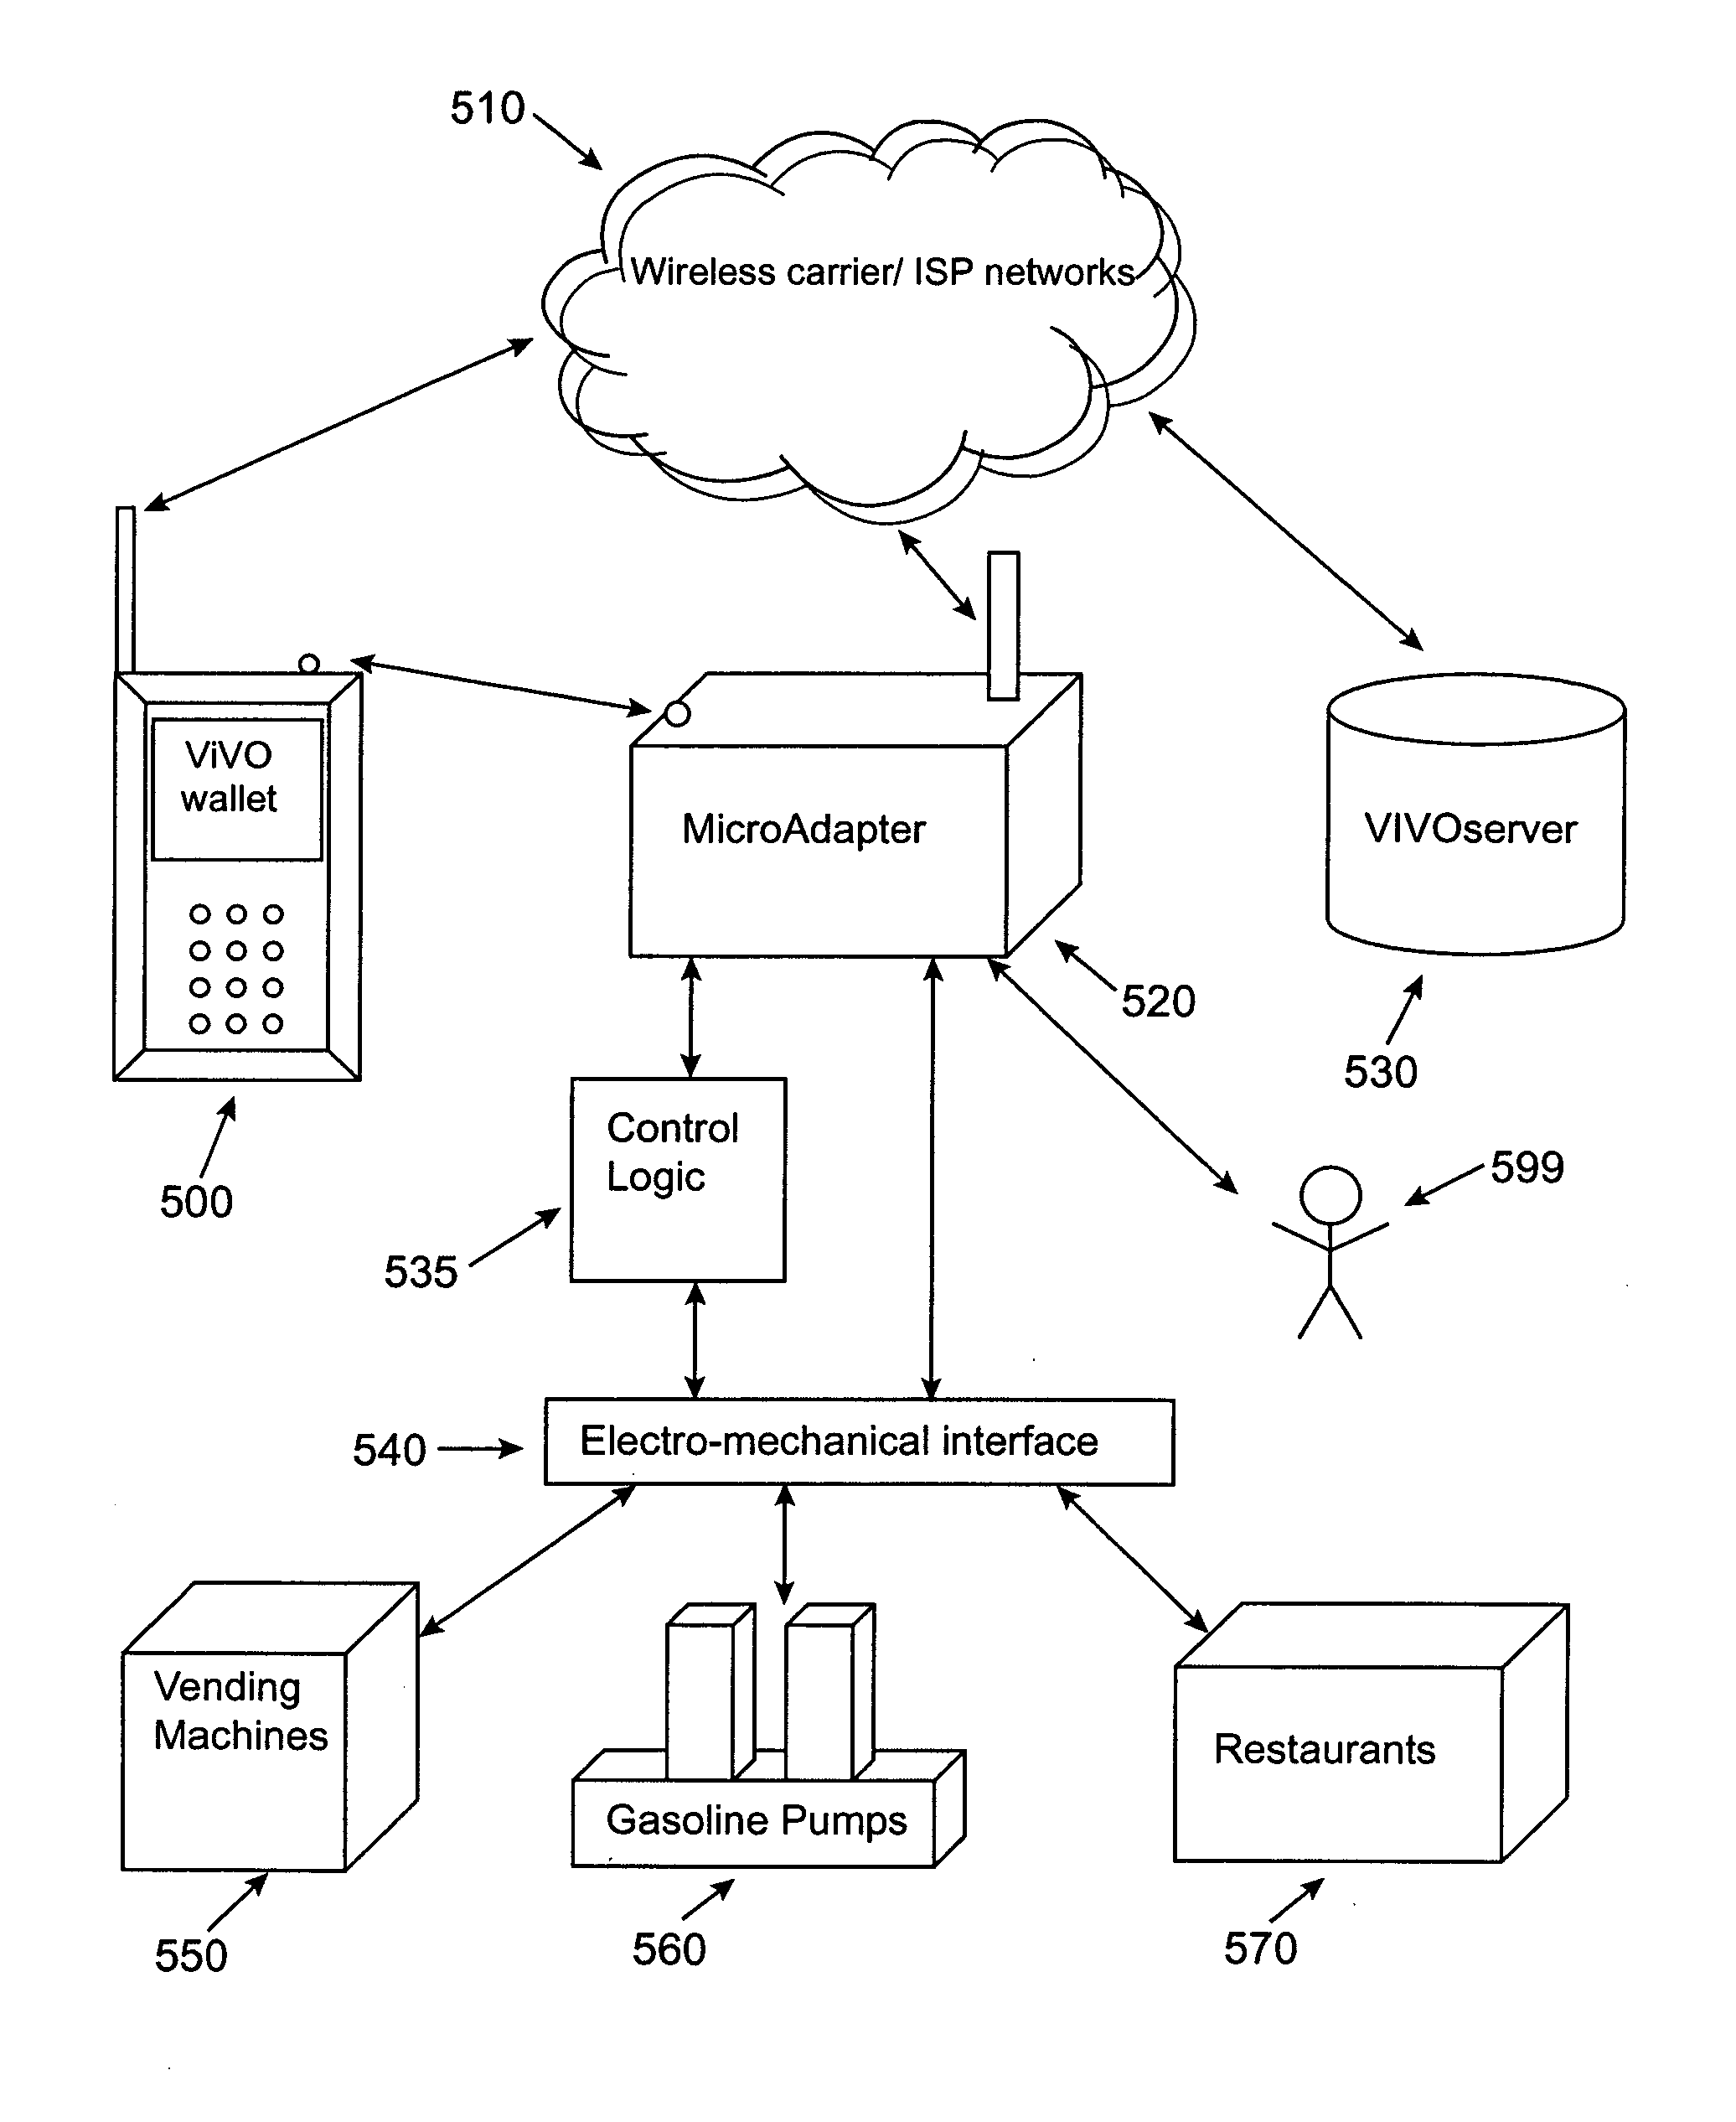 Micropayment financial transaction process utilizing wireless network processing